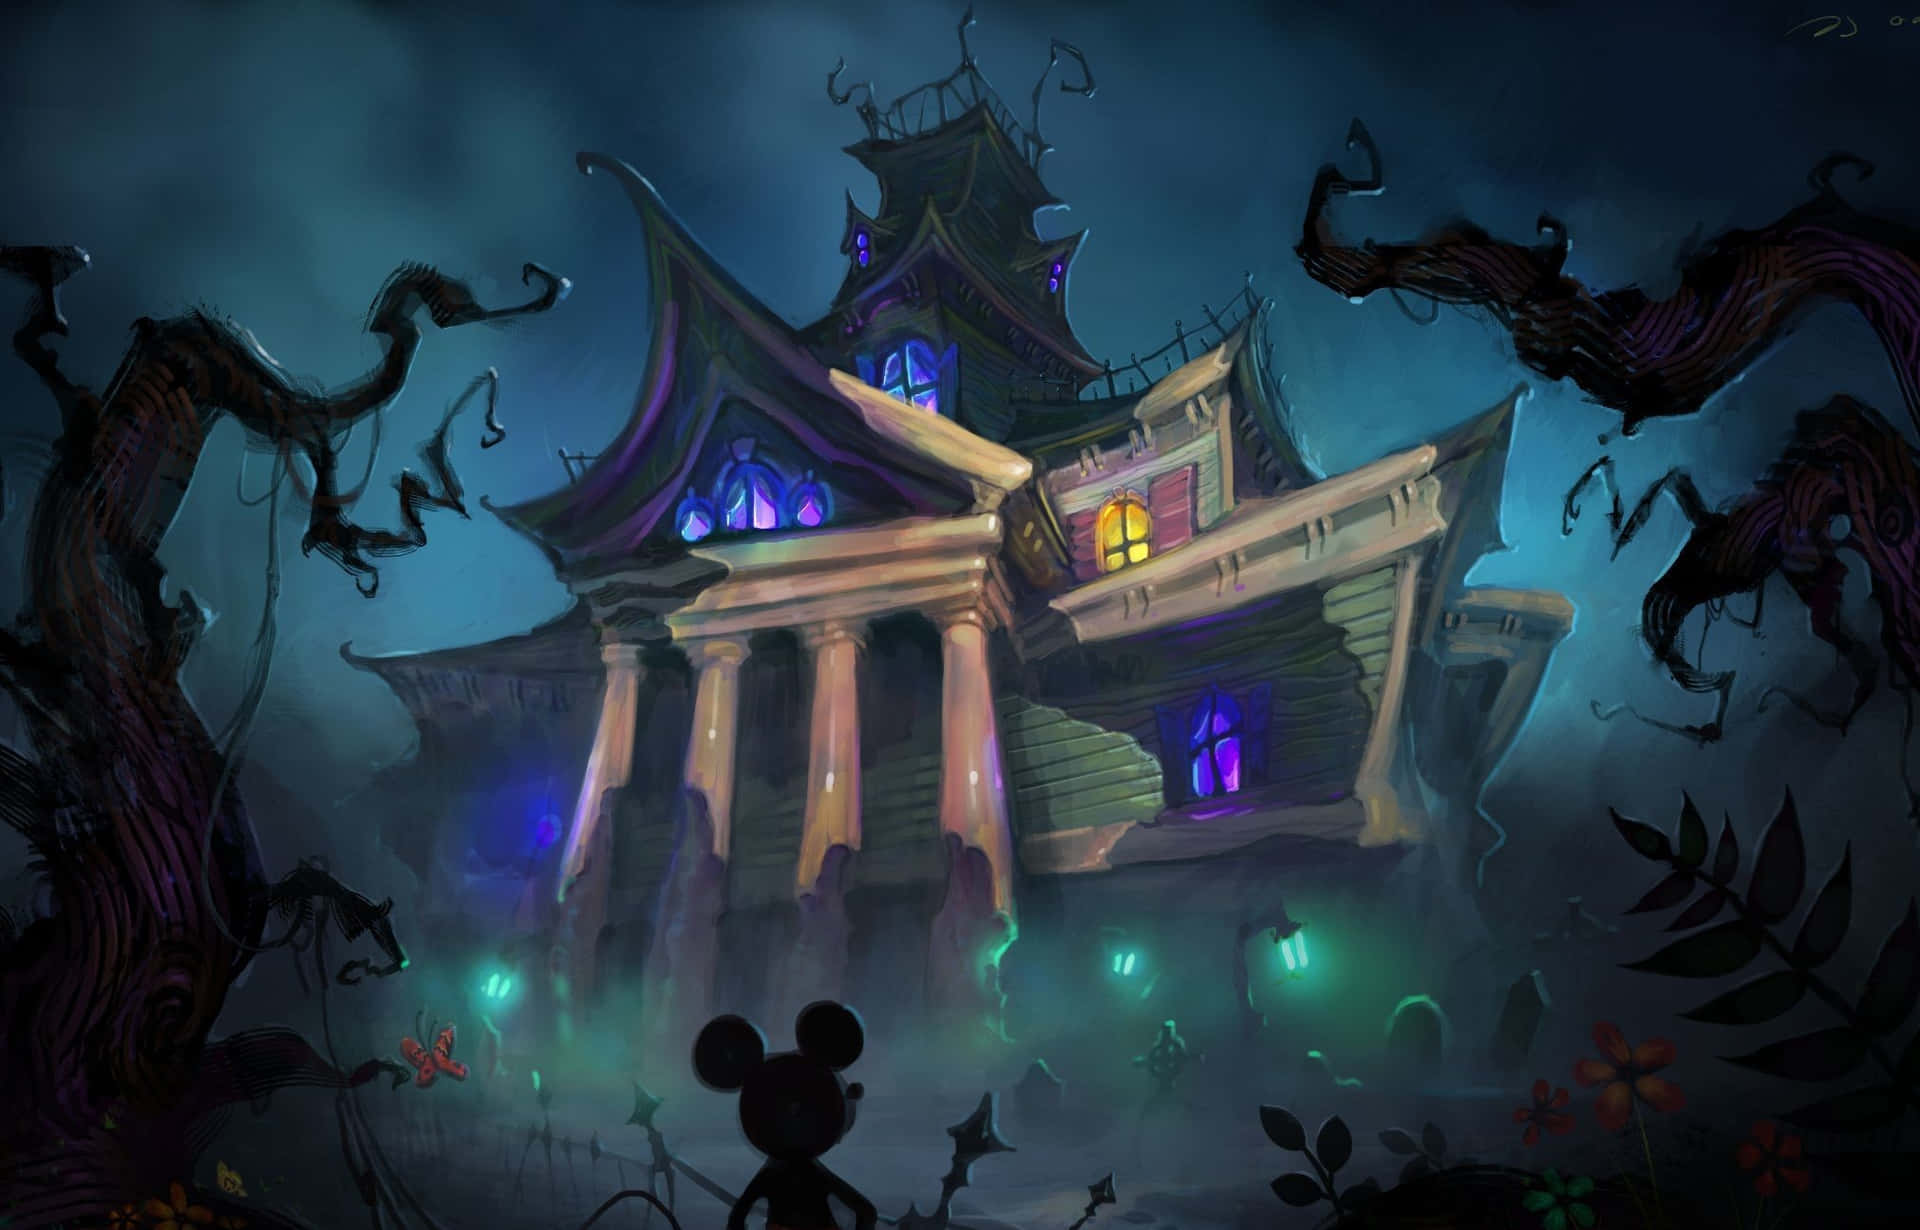 The Haunted Mansion, Home to Lots of Unsettling Surprises